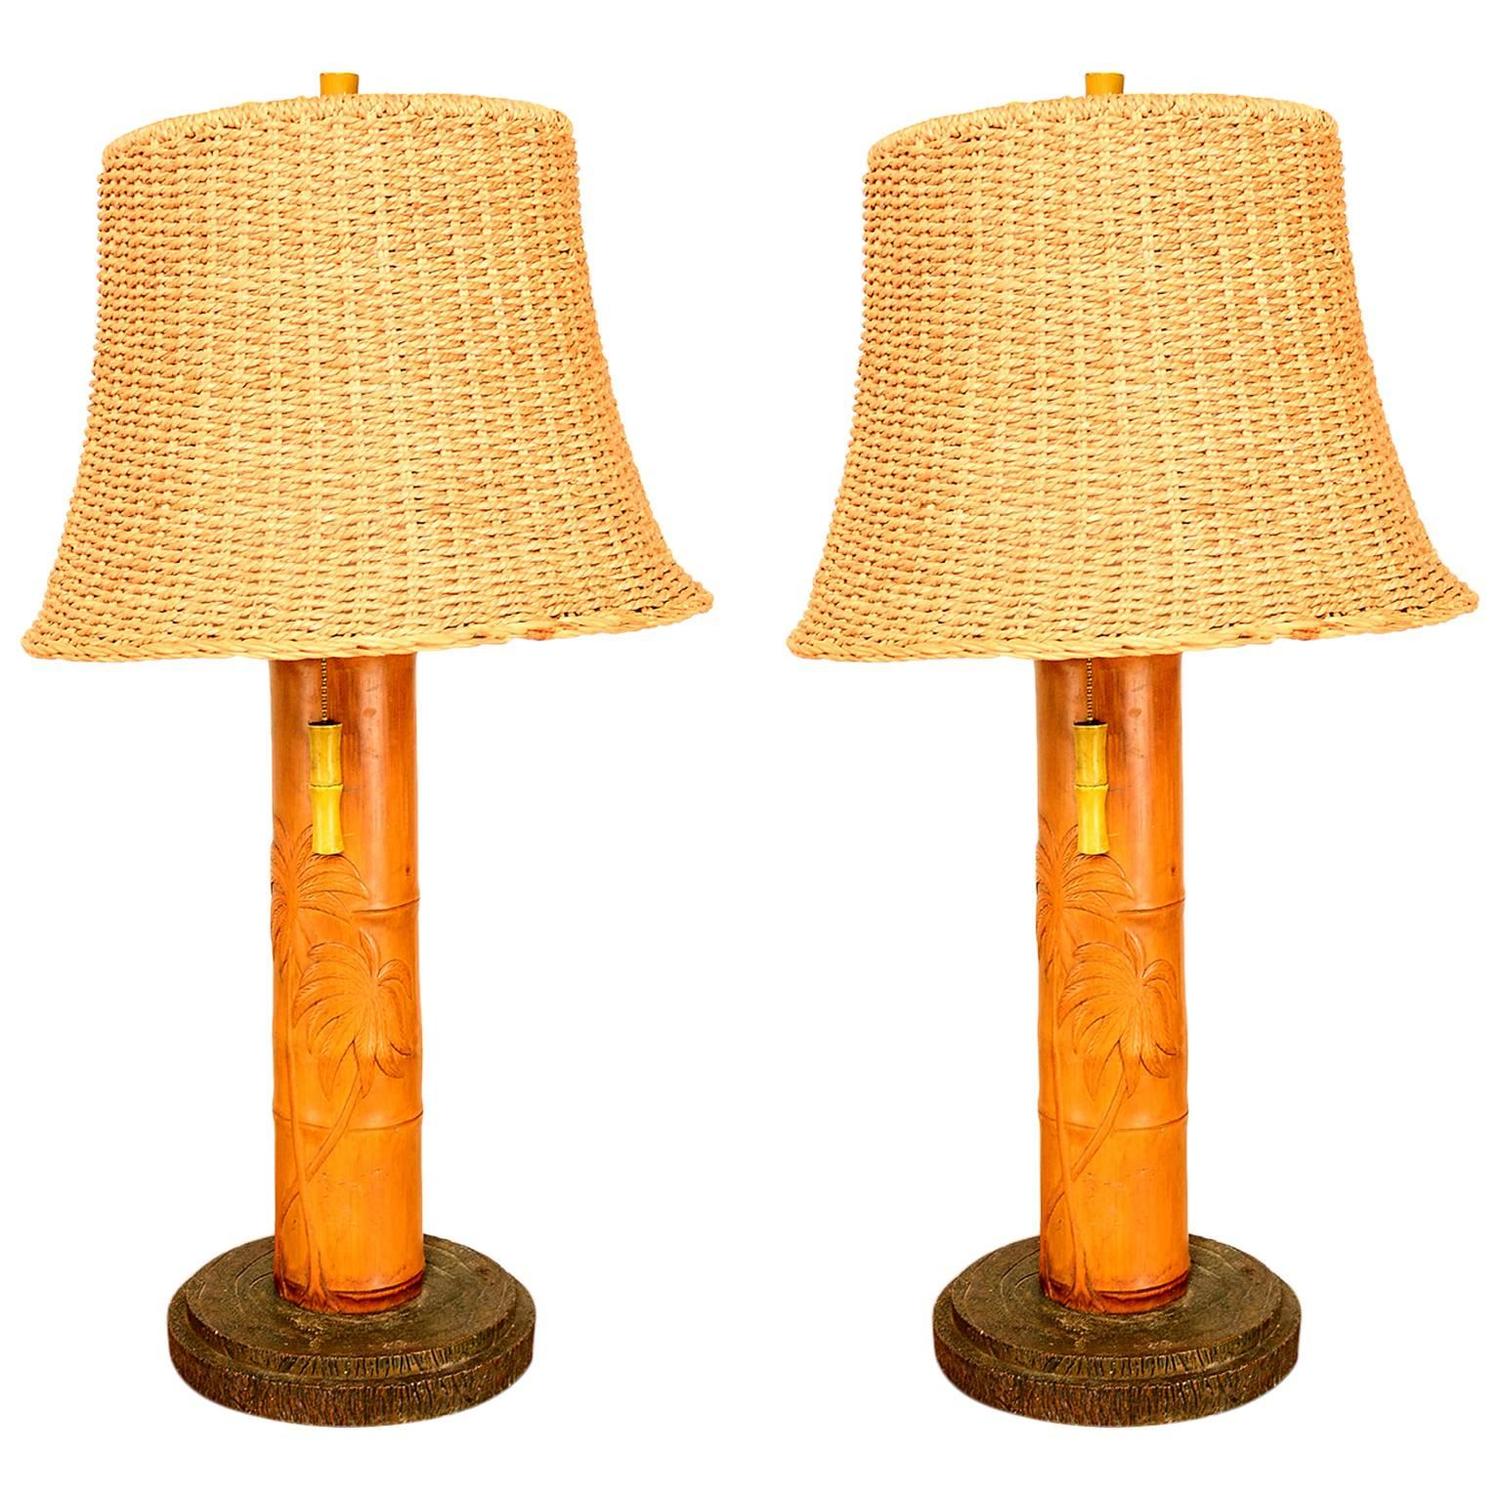 Pair of Bamboo Table Lamps For Sale at 1stdibs